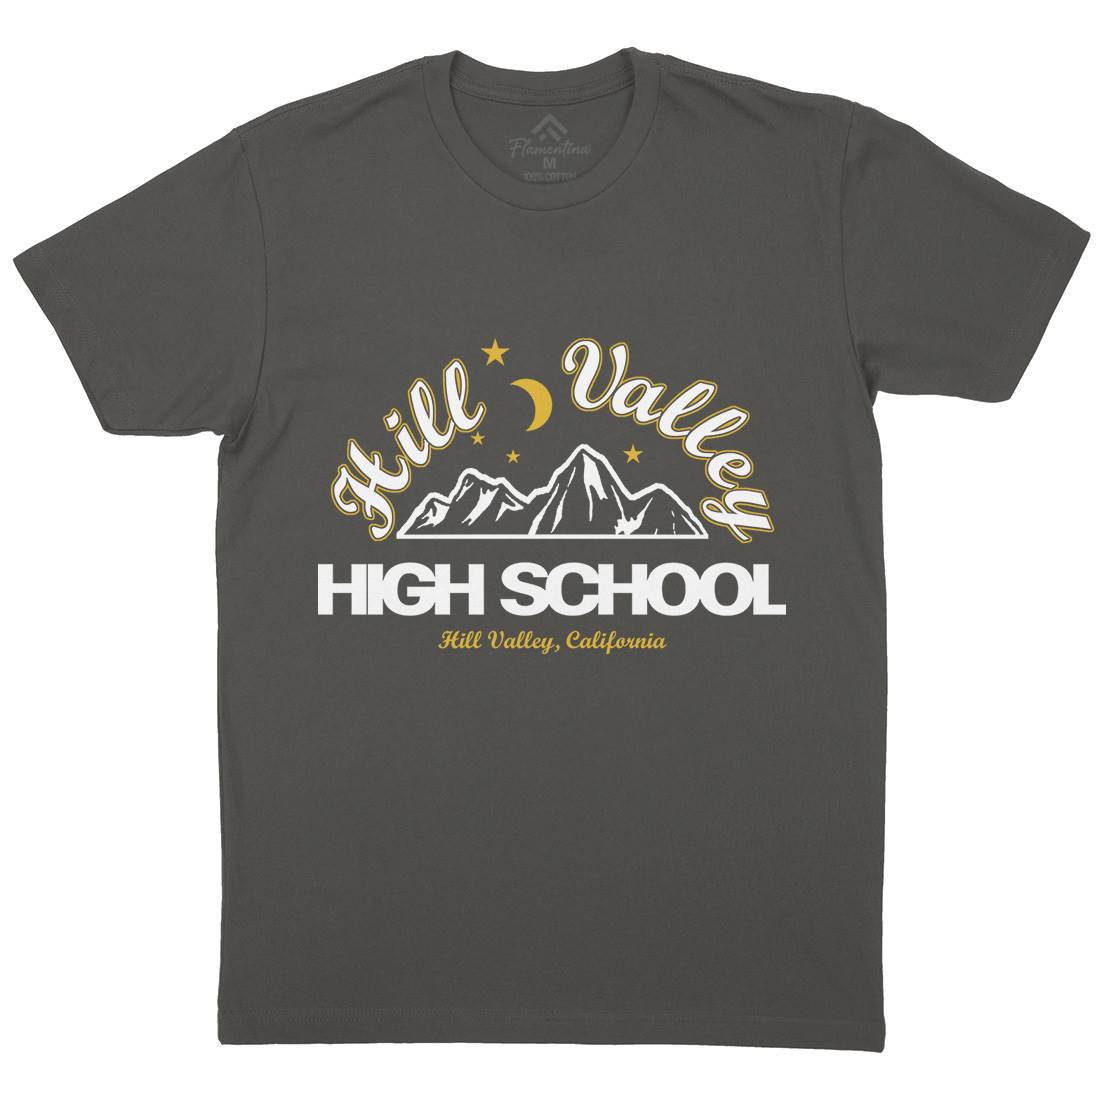 Hill Valley Mens Crew Neck T-Shirt Space D402